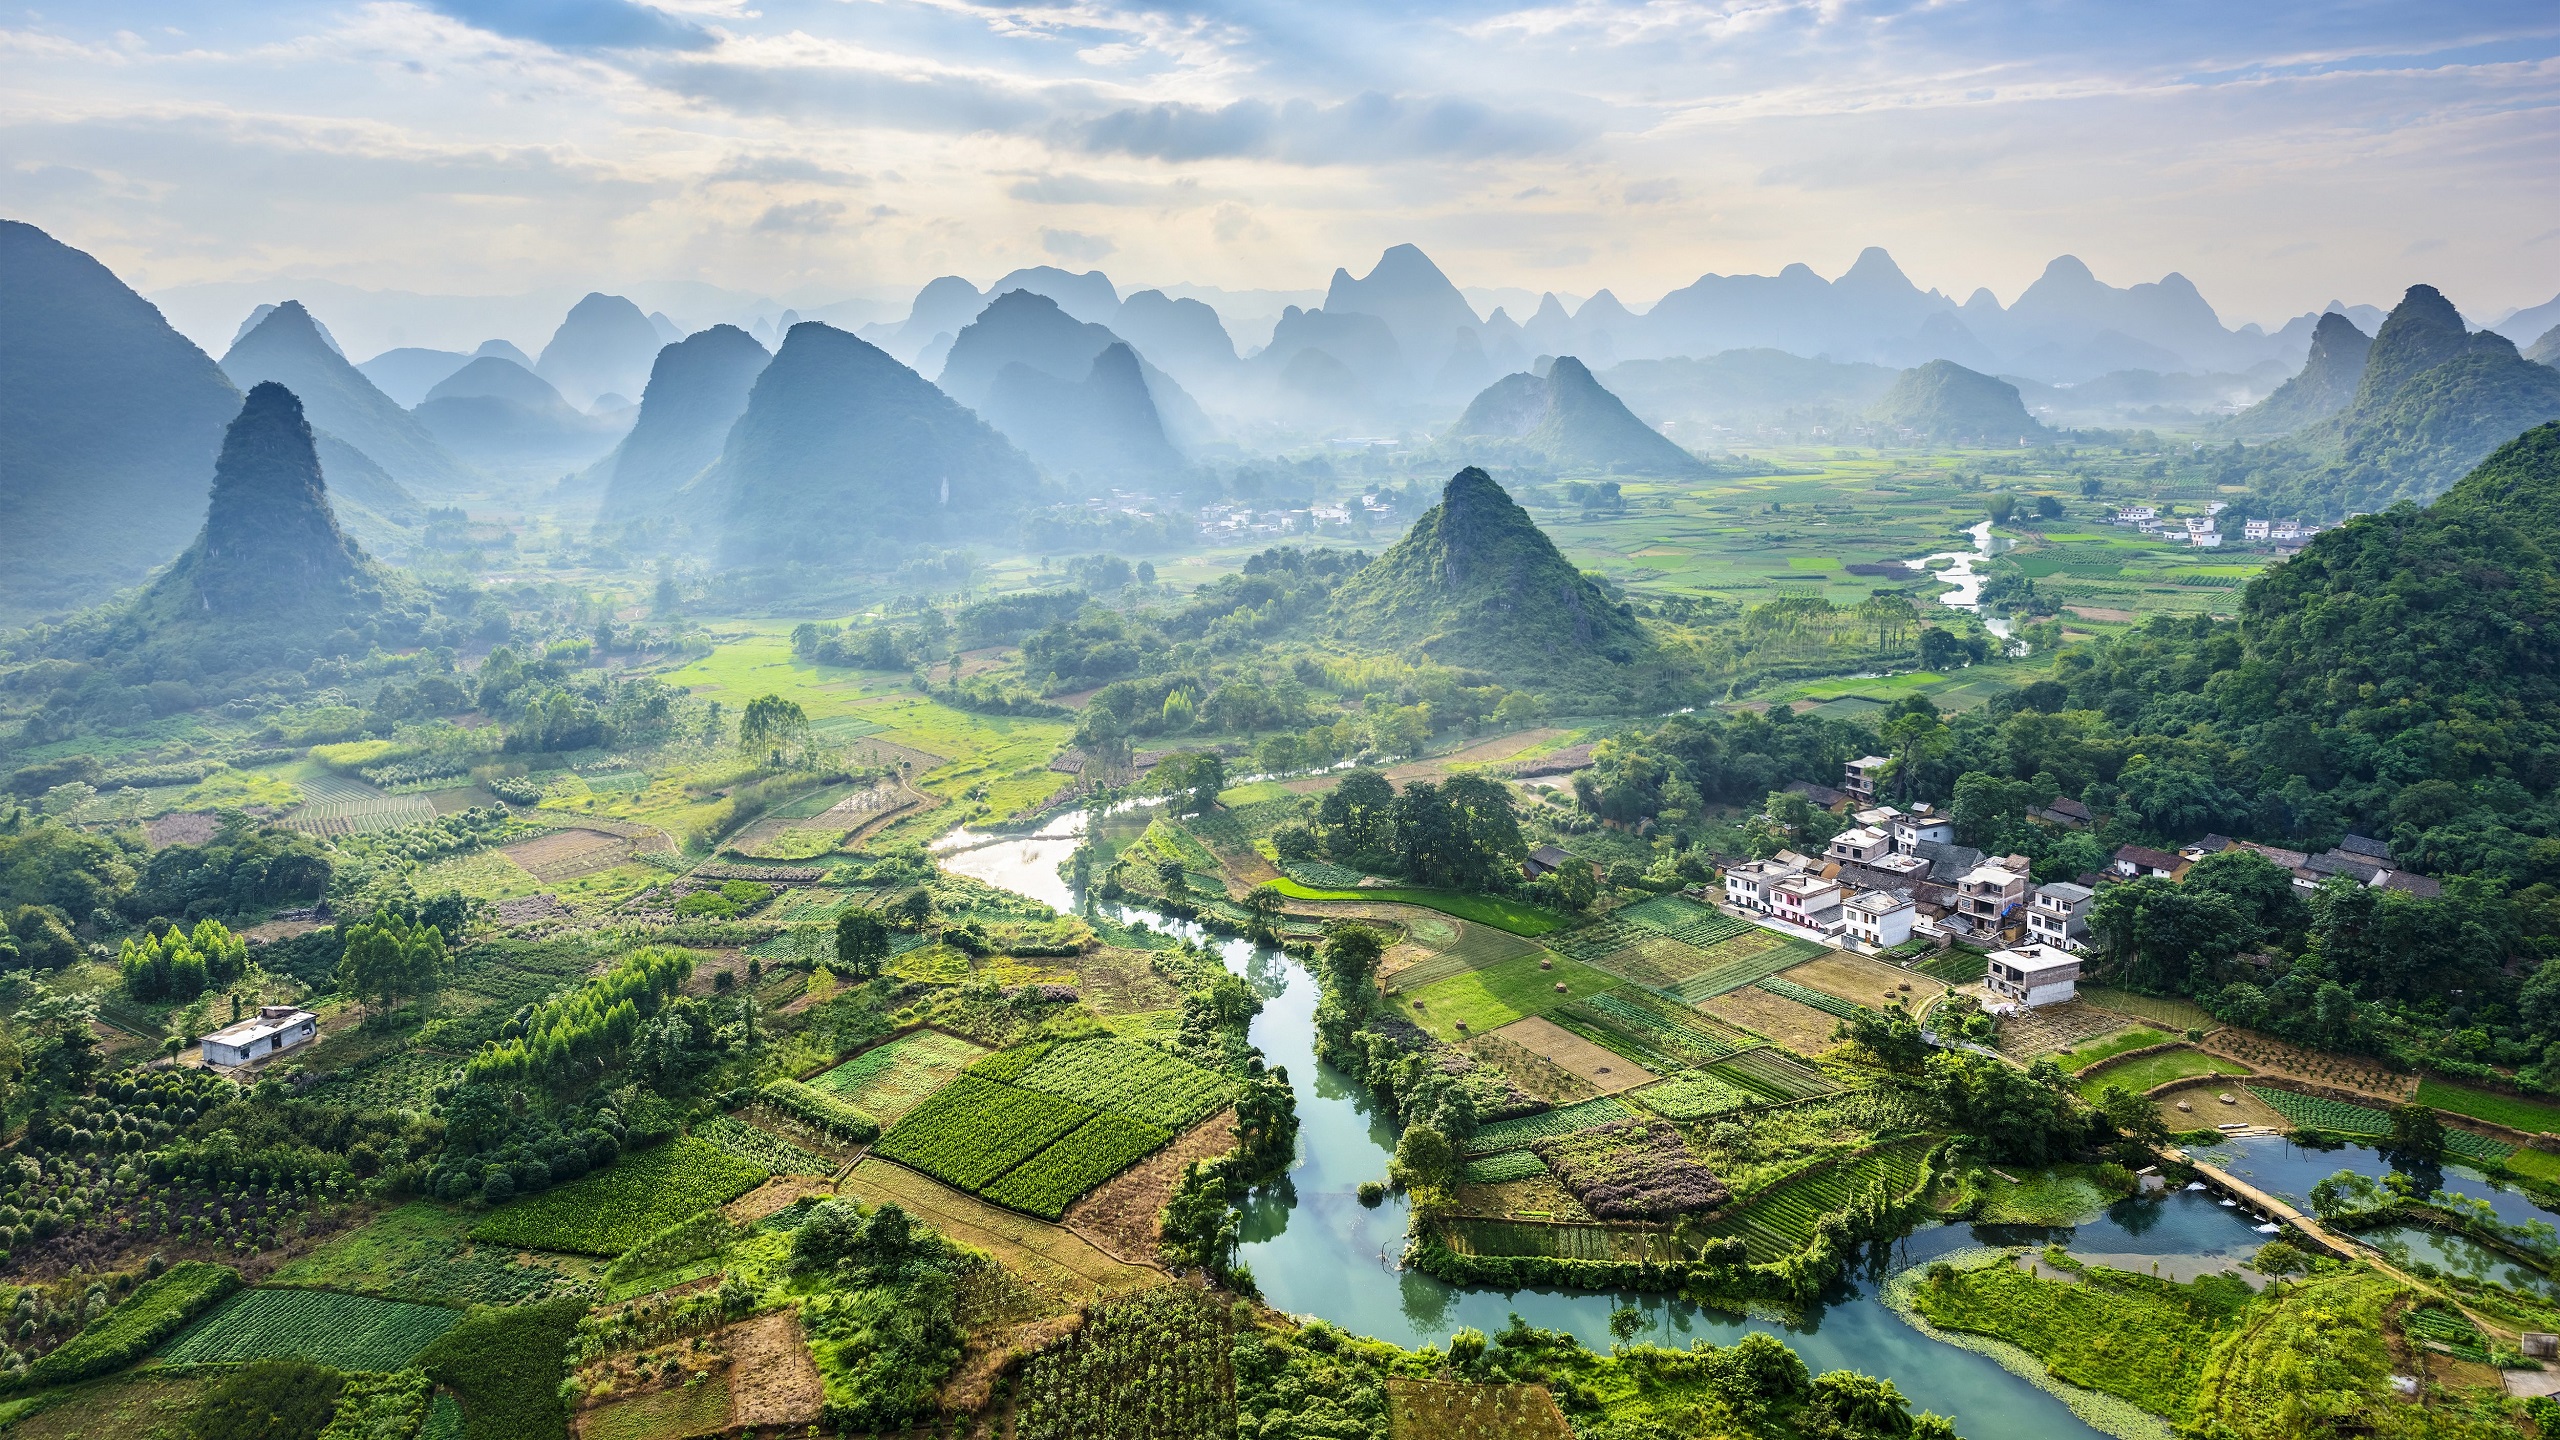 General 2560x1440 landscape nature China village Asia hills river field aerial view Guilin